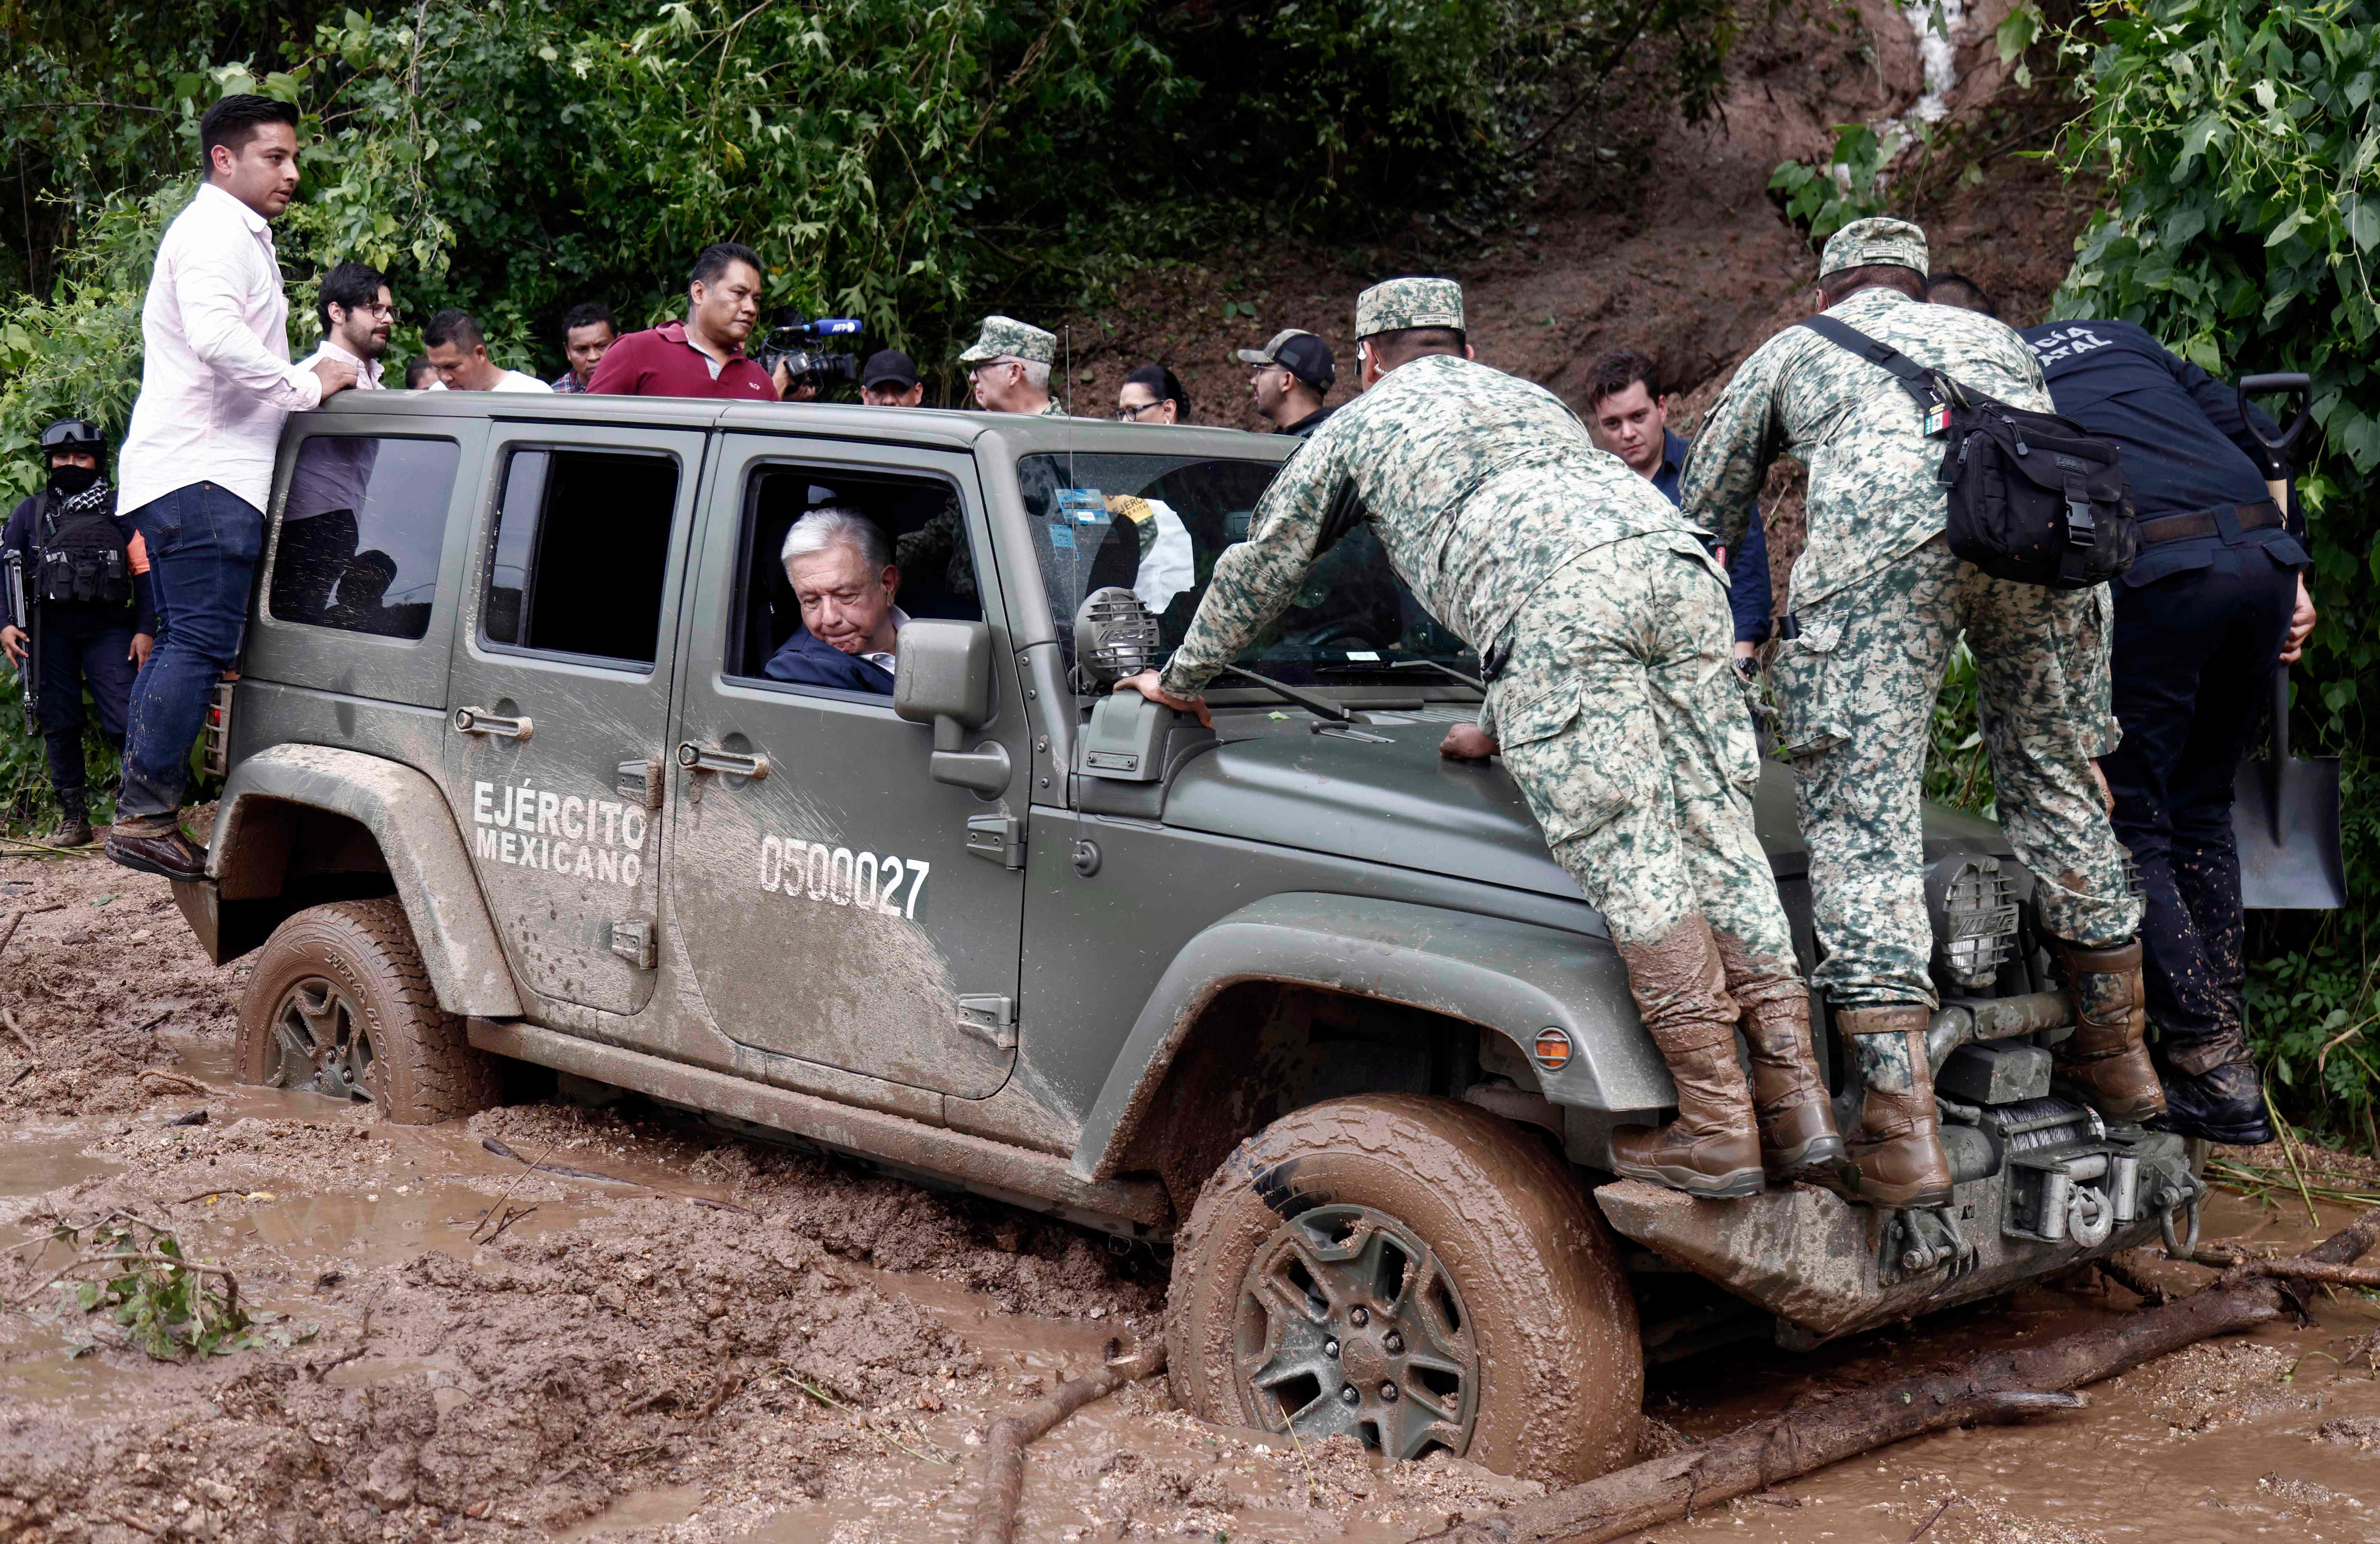 Andres Manuel Lopez Obrador’s vehicle is stuck in mud during a visit to the Kilometro 42 community, near Acapulco after the hurricane